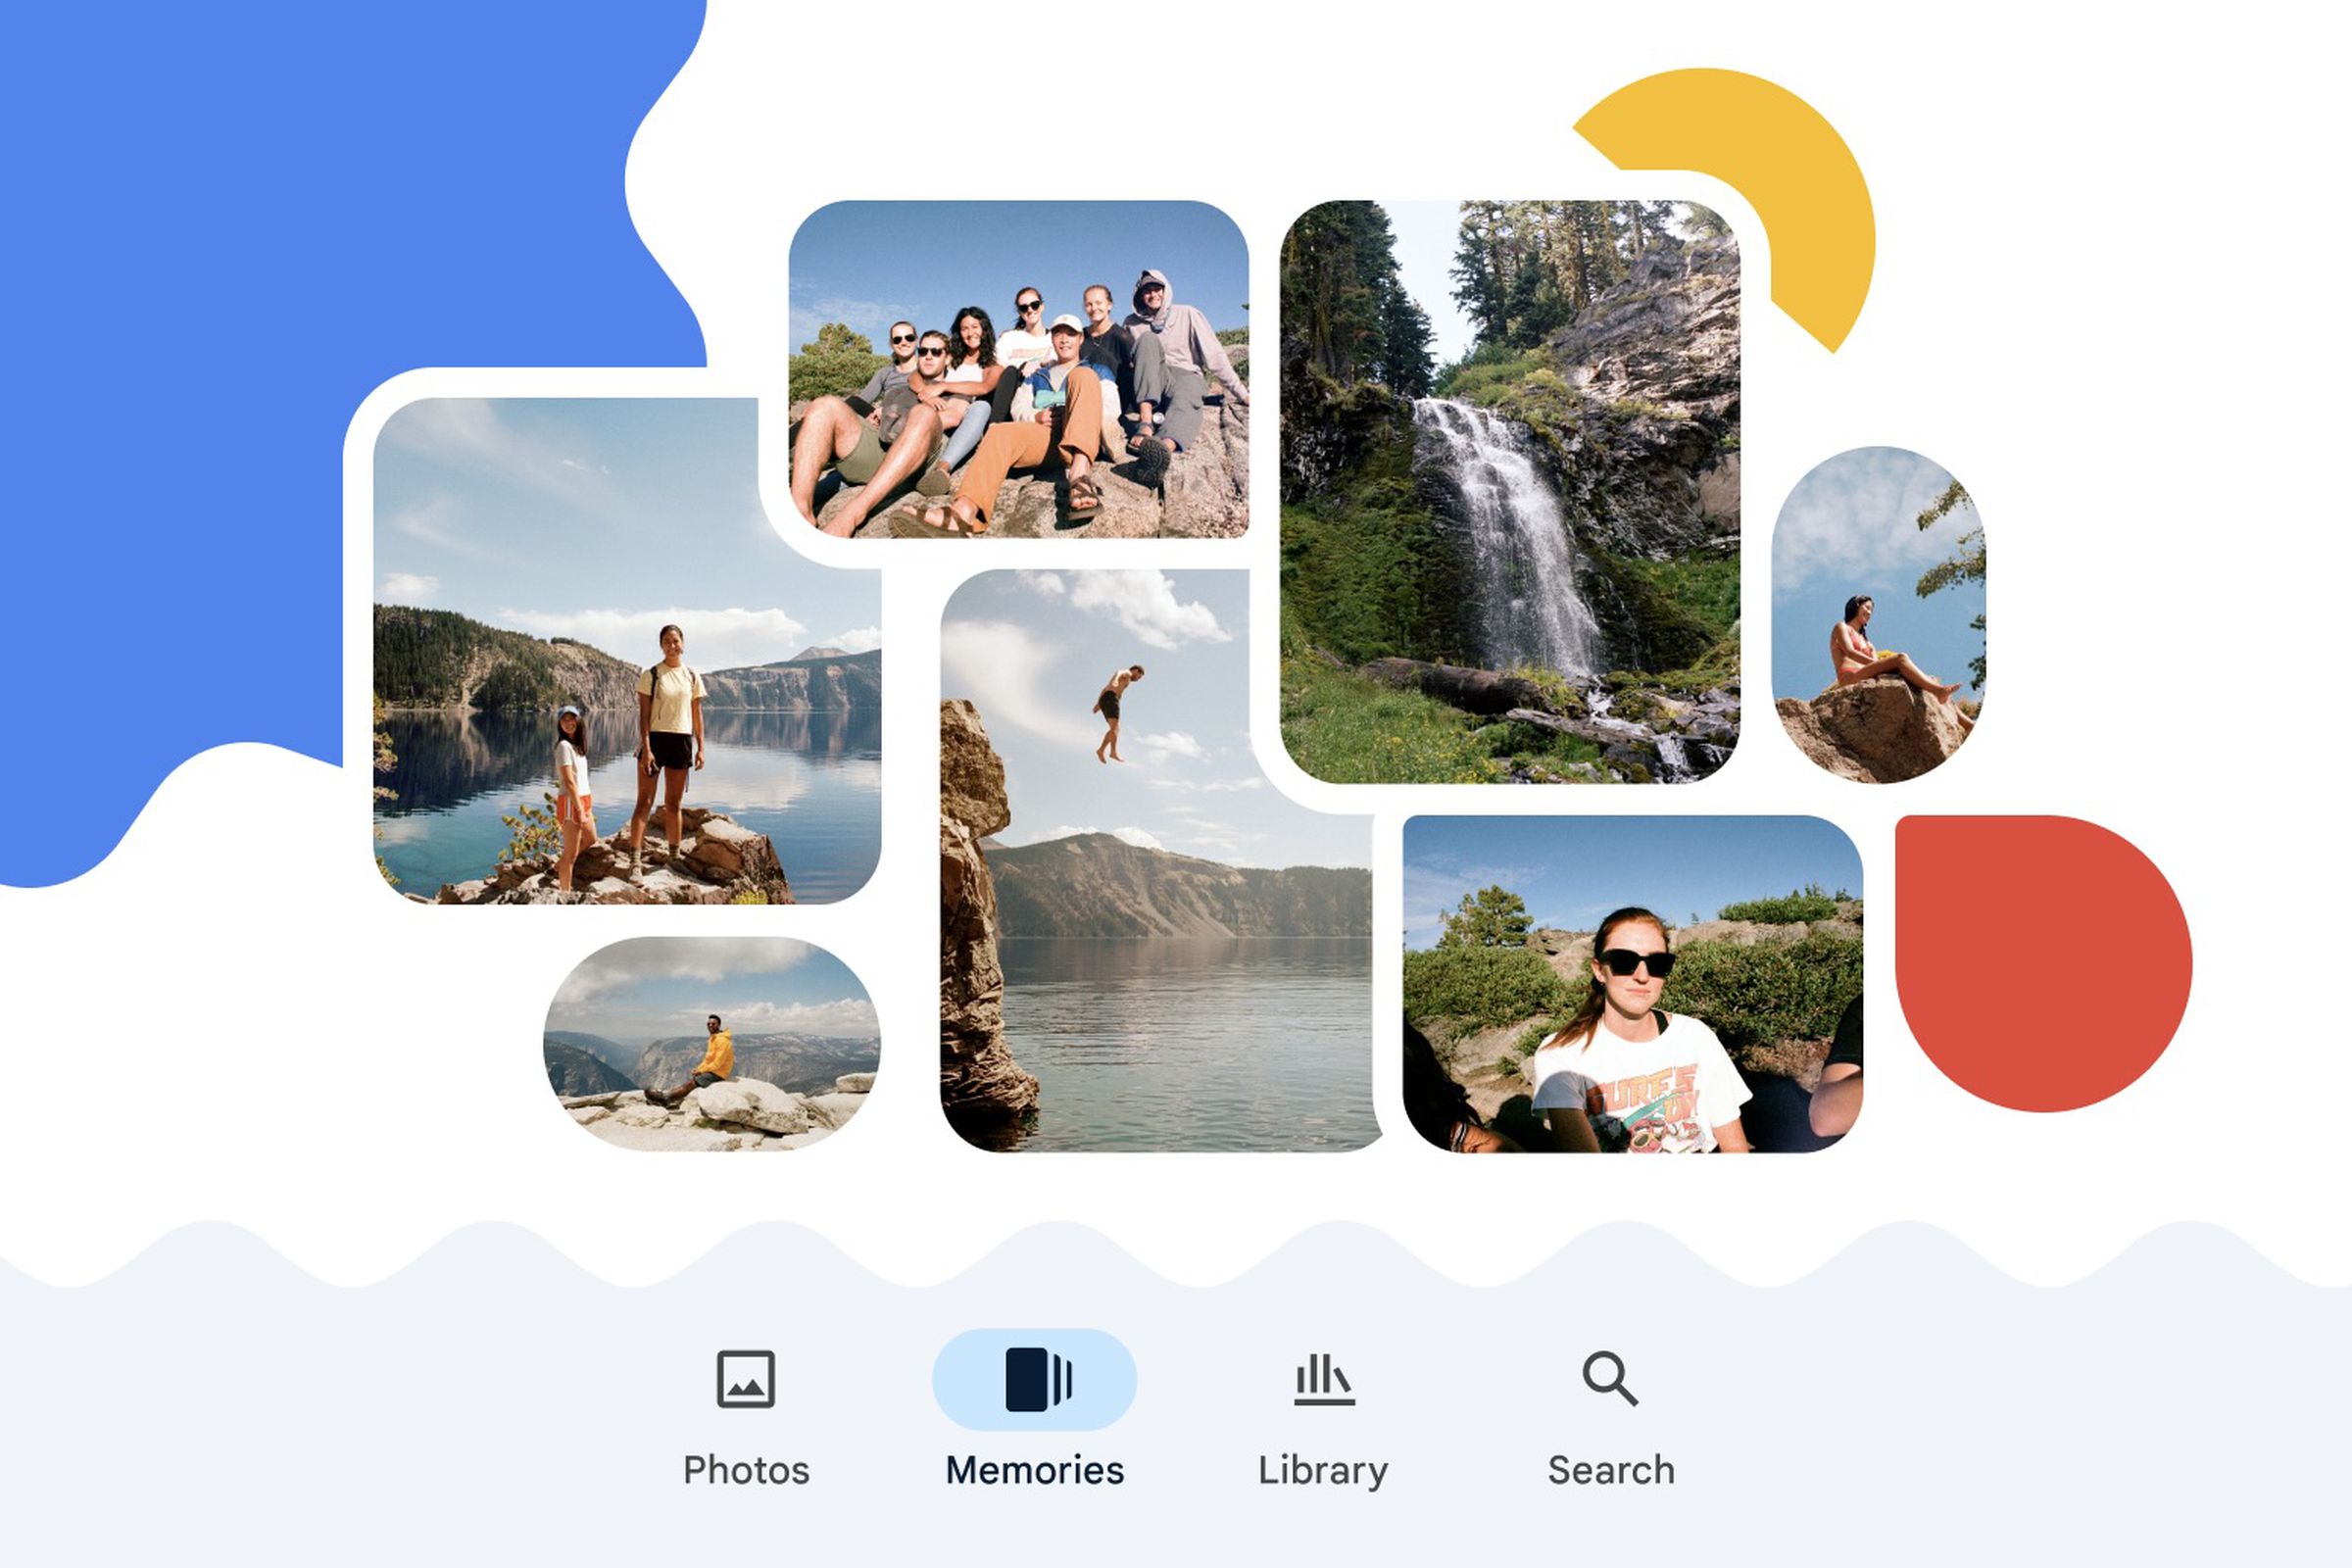 Stylized illustration of the Google Photos app with photos, memories, library, and search buttons on the bottom